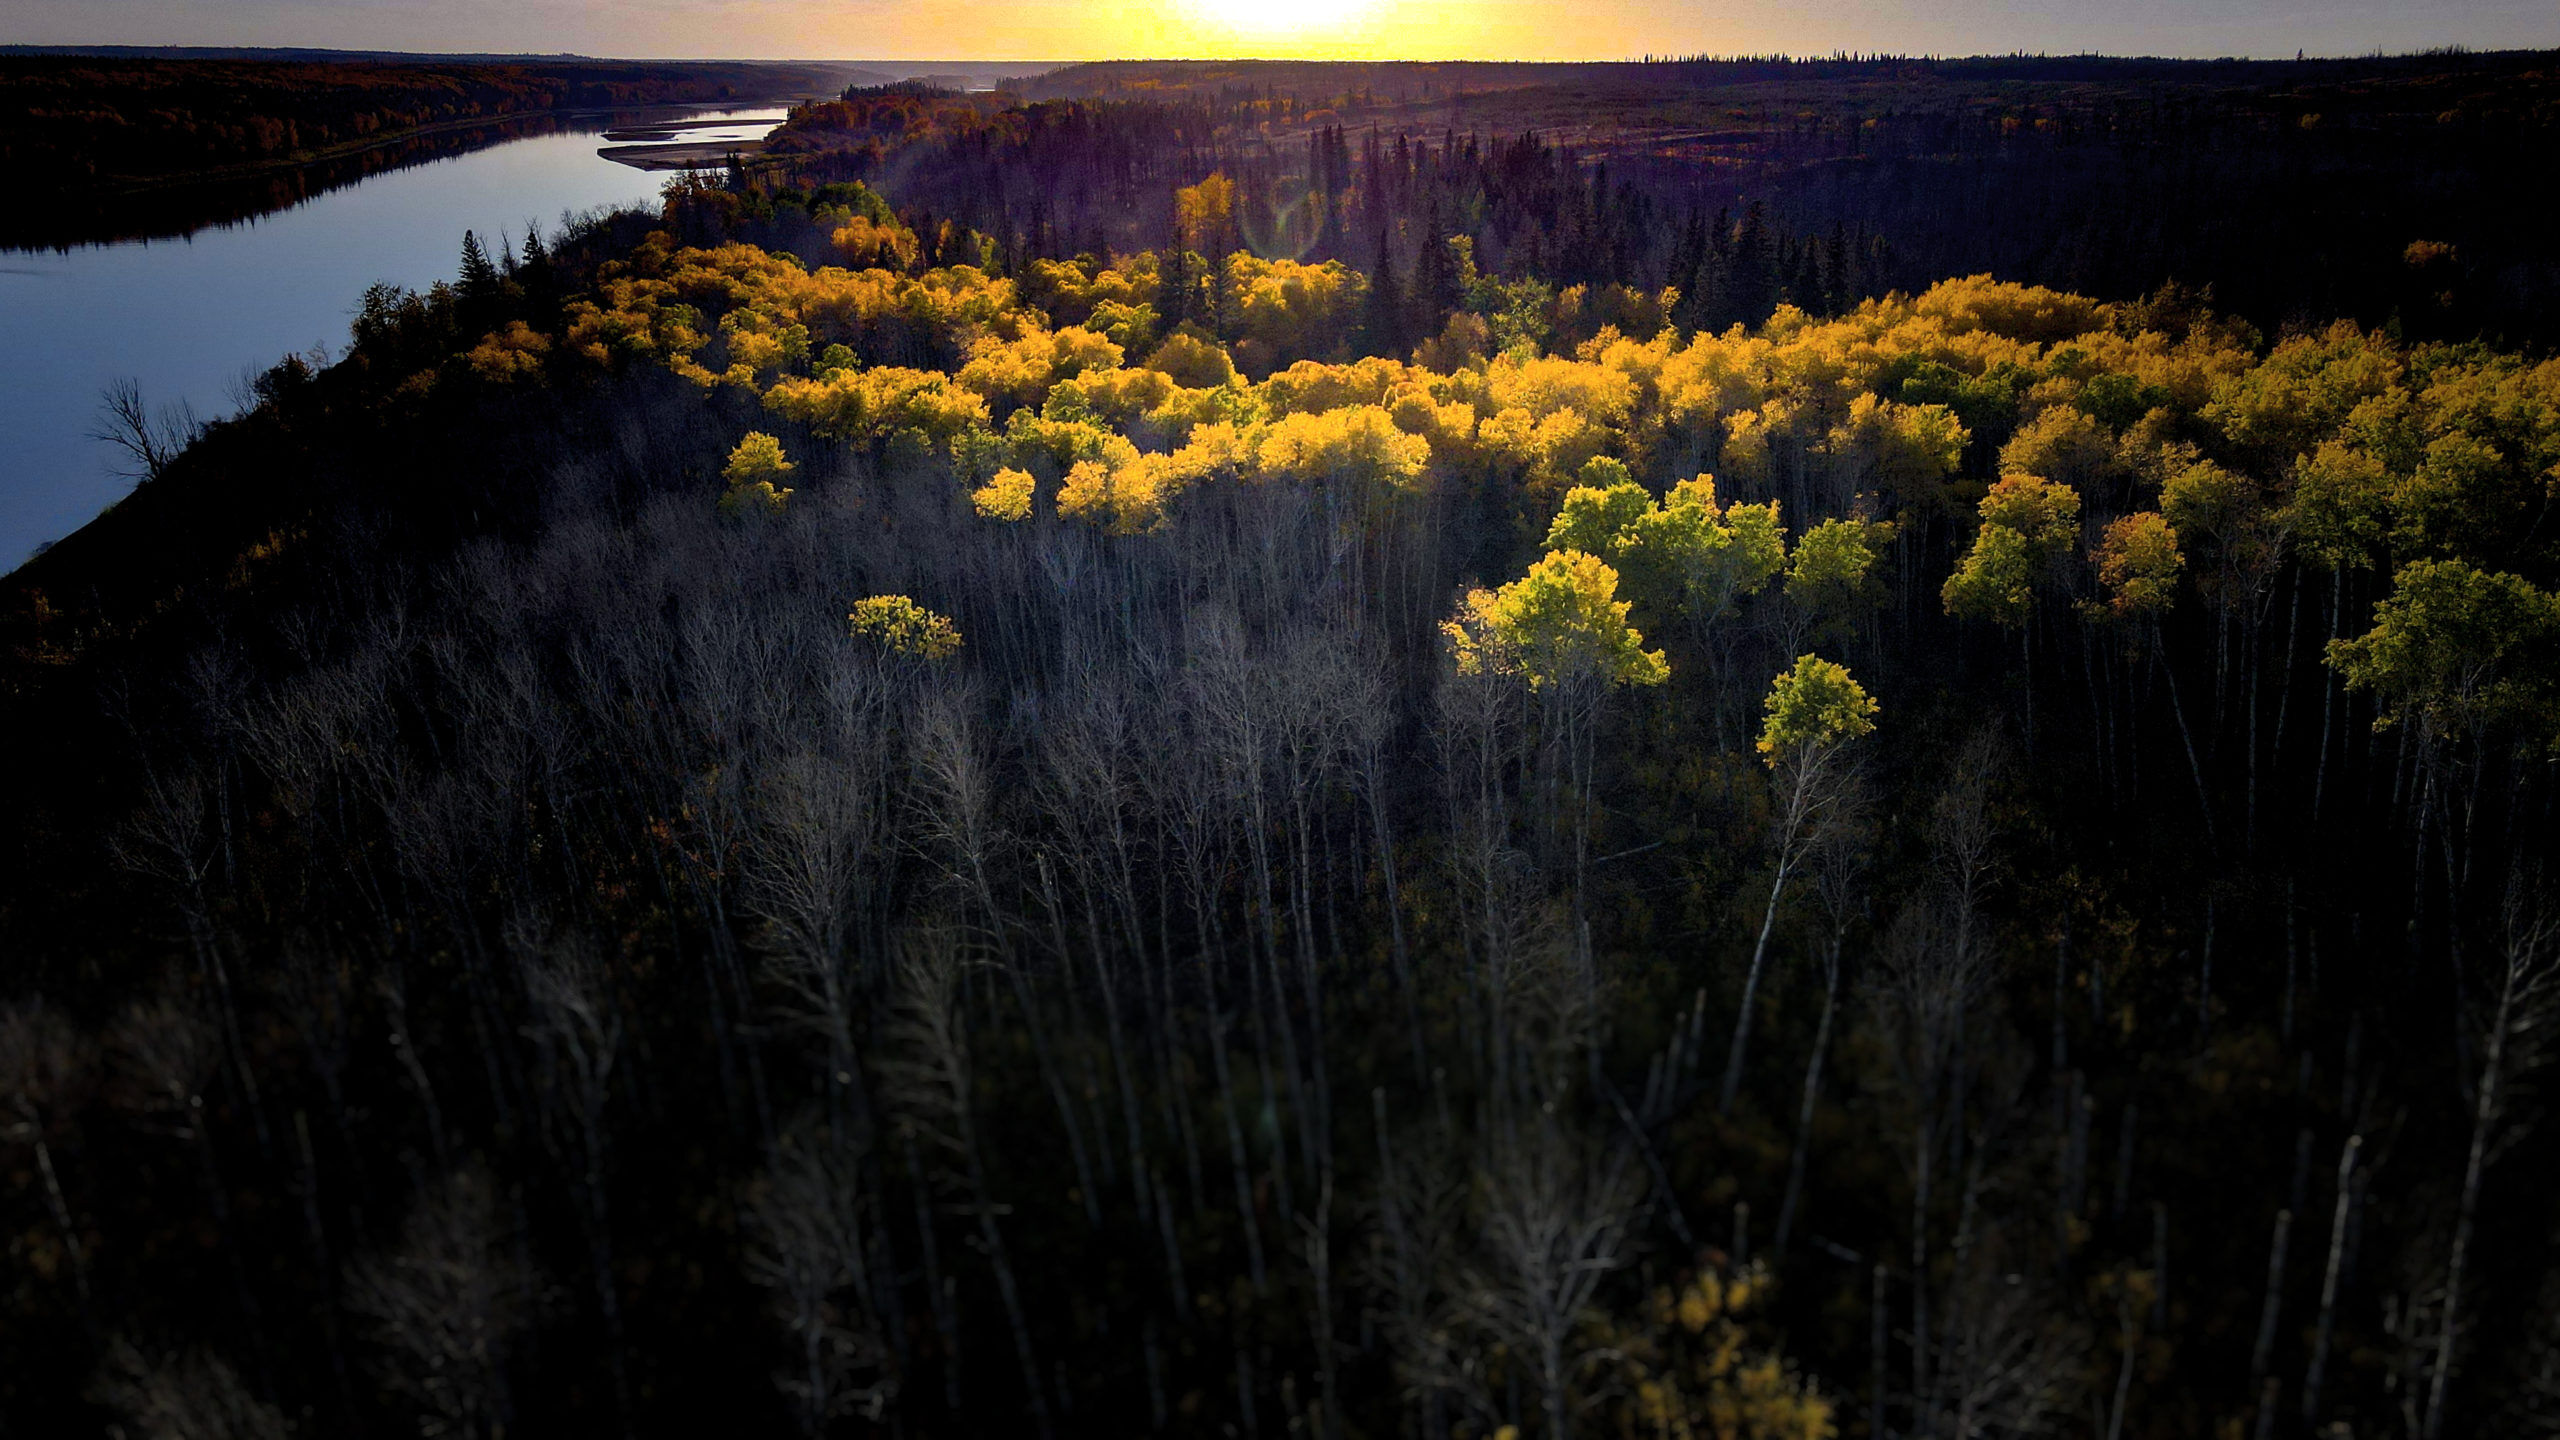 Sunset over a Fall Forest